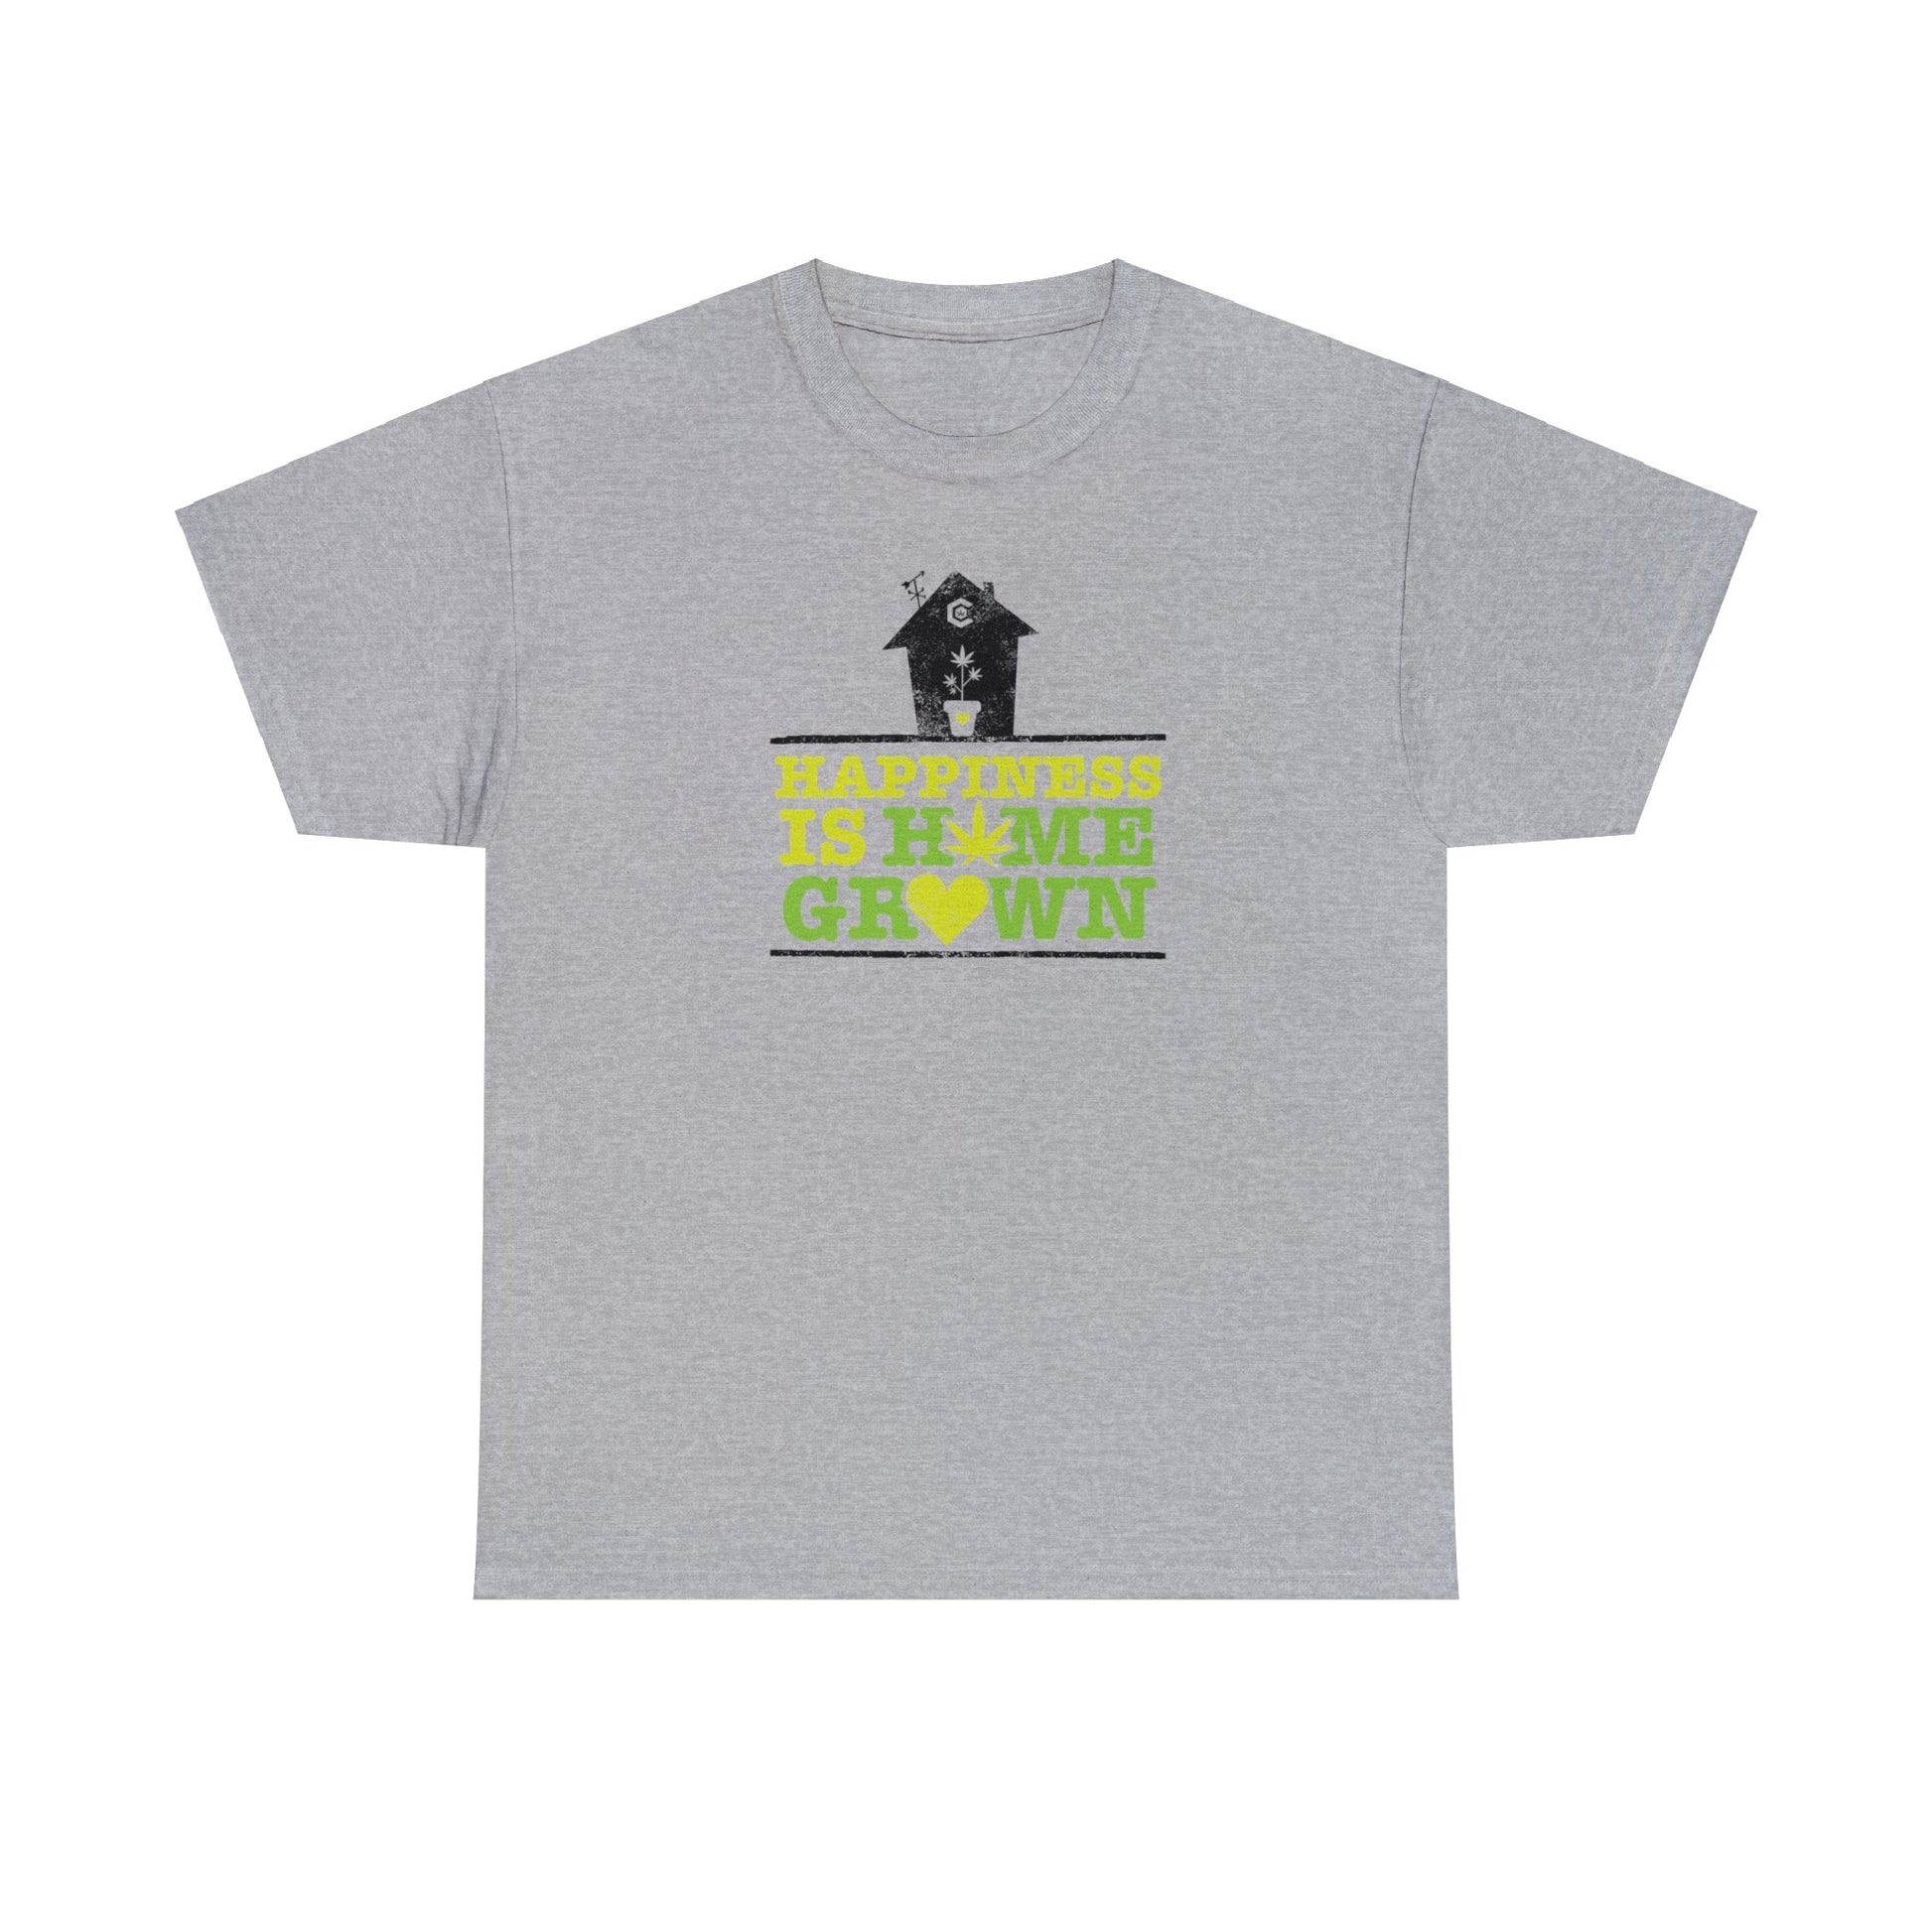 A Happiness Is Homegrown Pot Shirt with a green and yellow design.